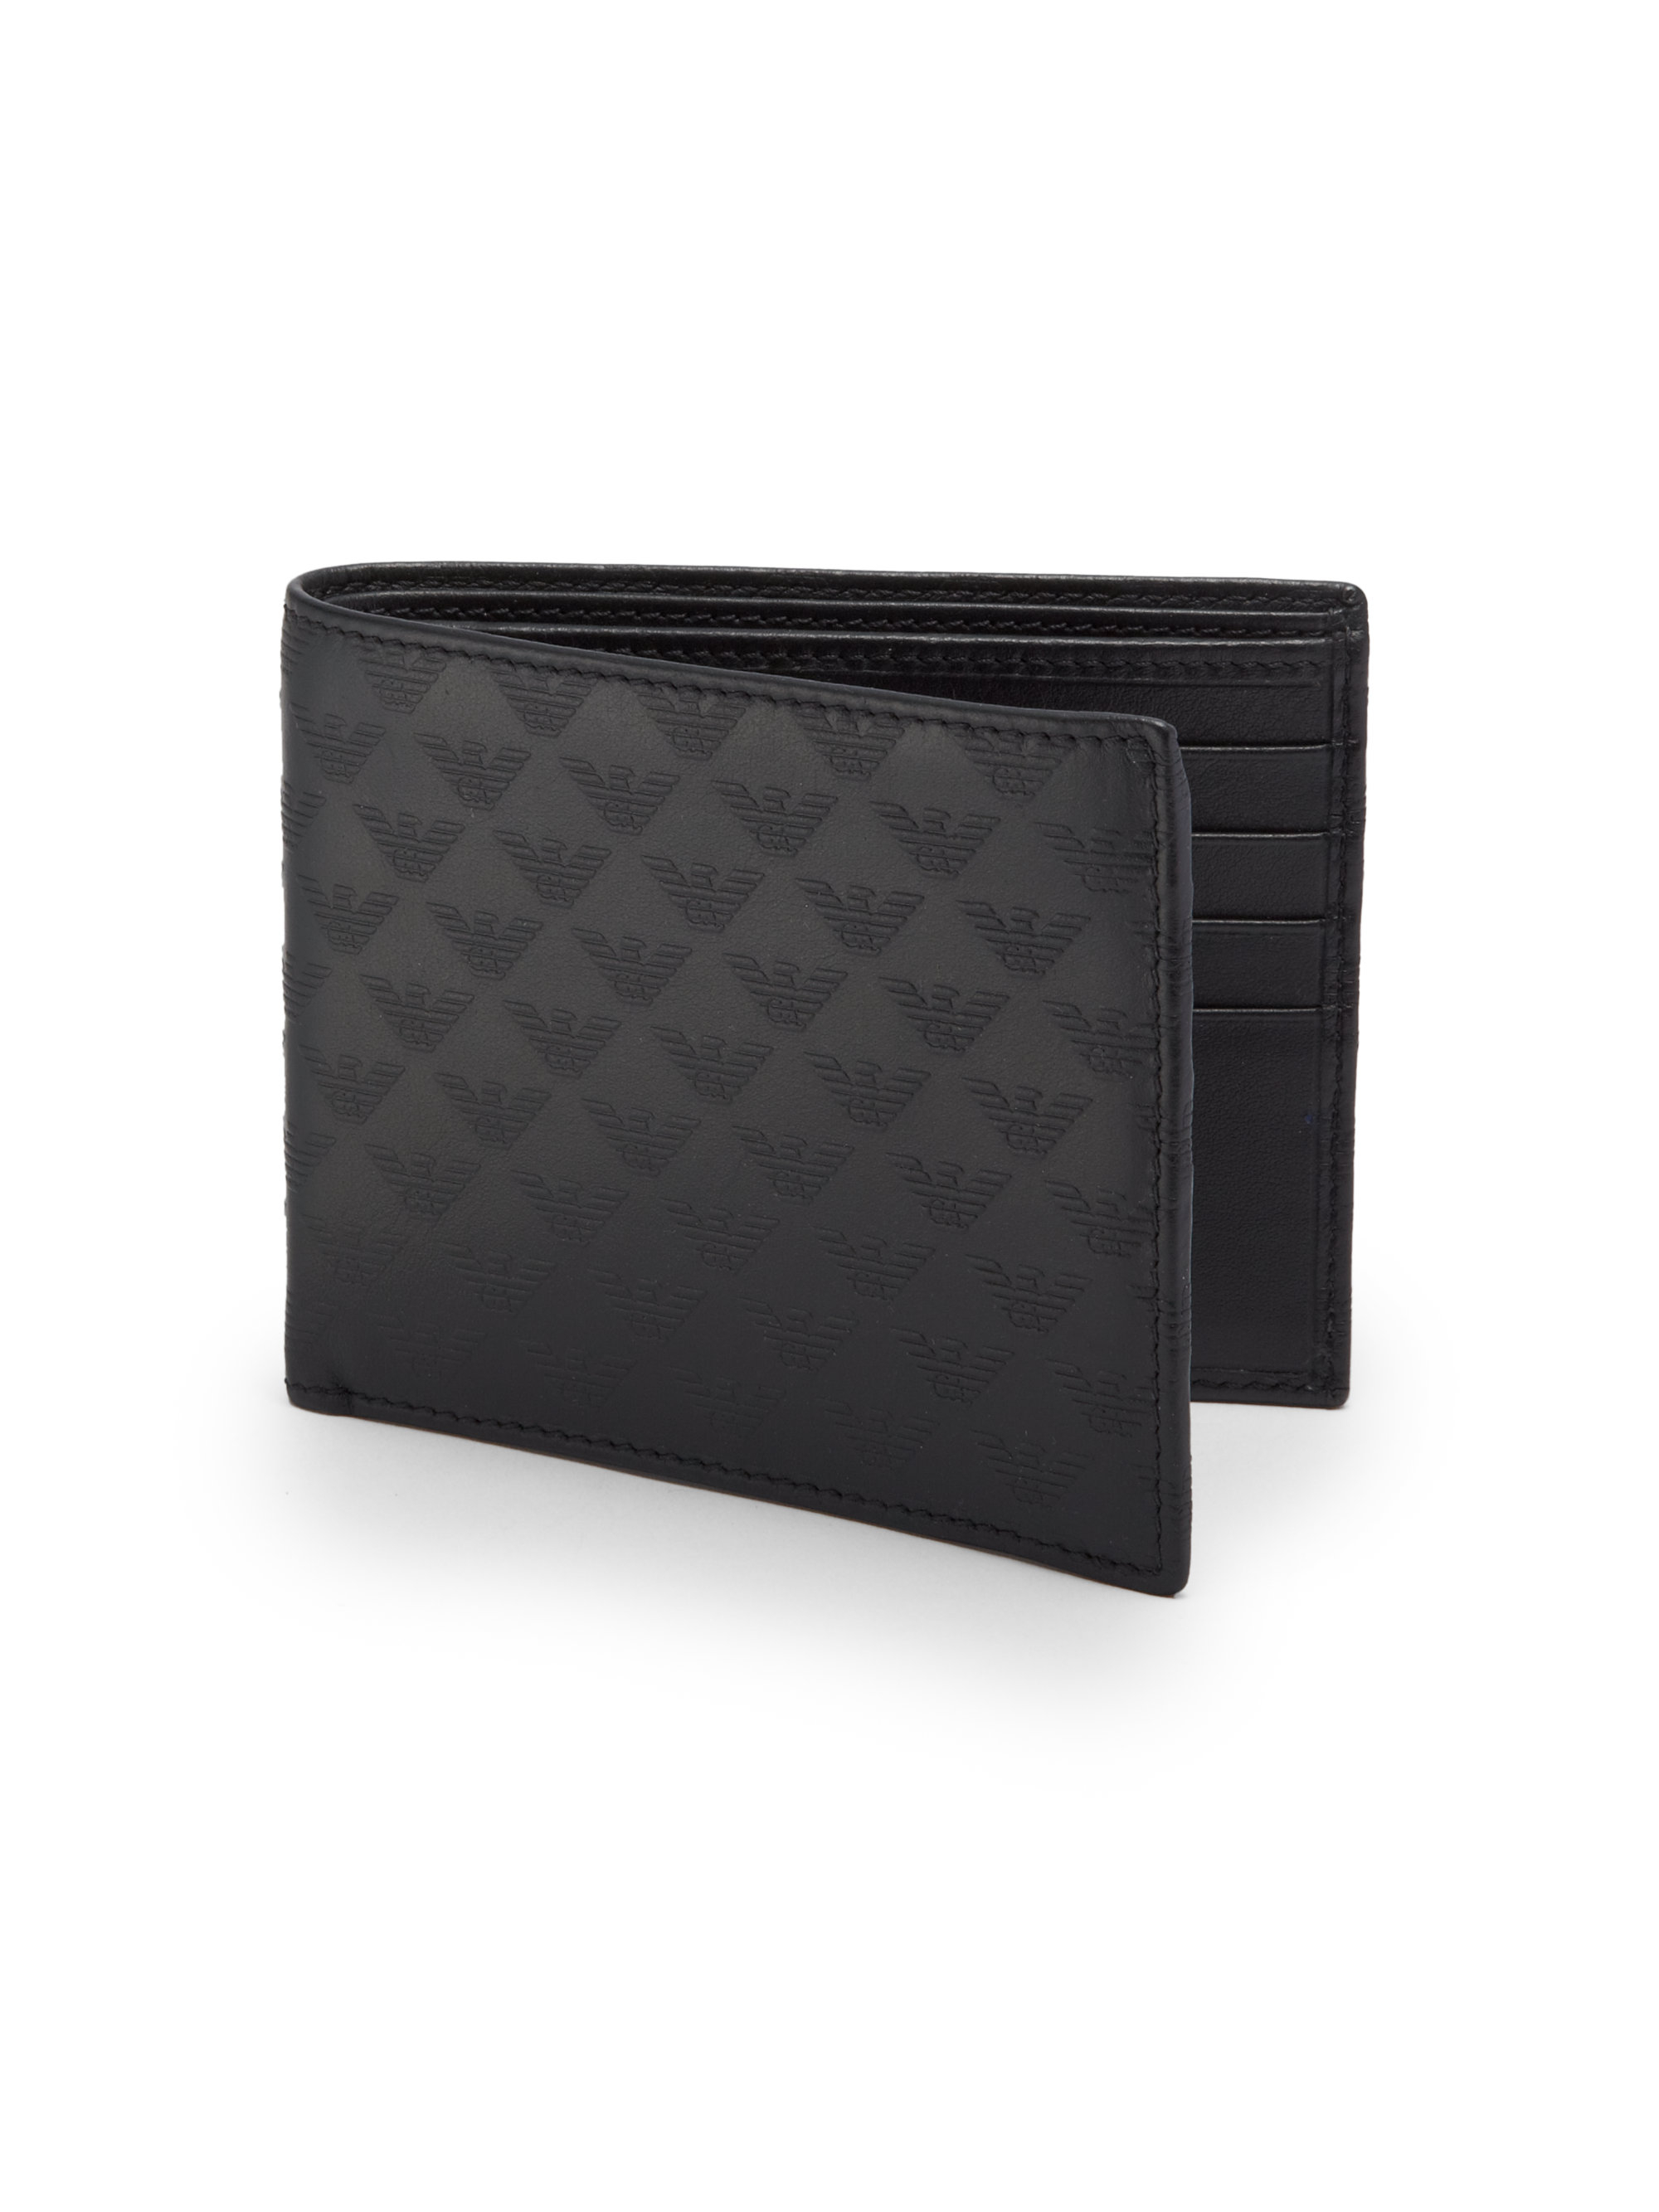 Emporio armani Leather Wallet in Black for Men | Lyst